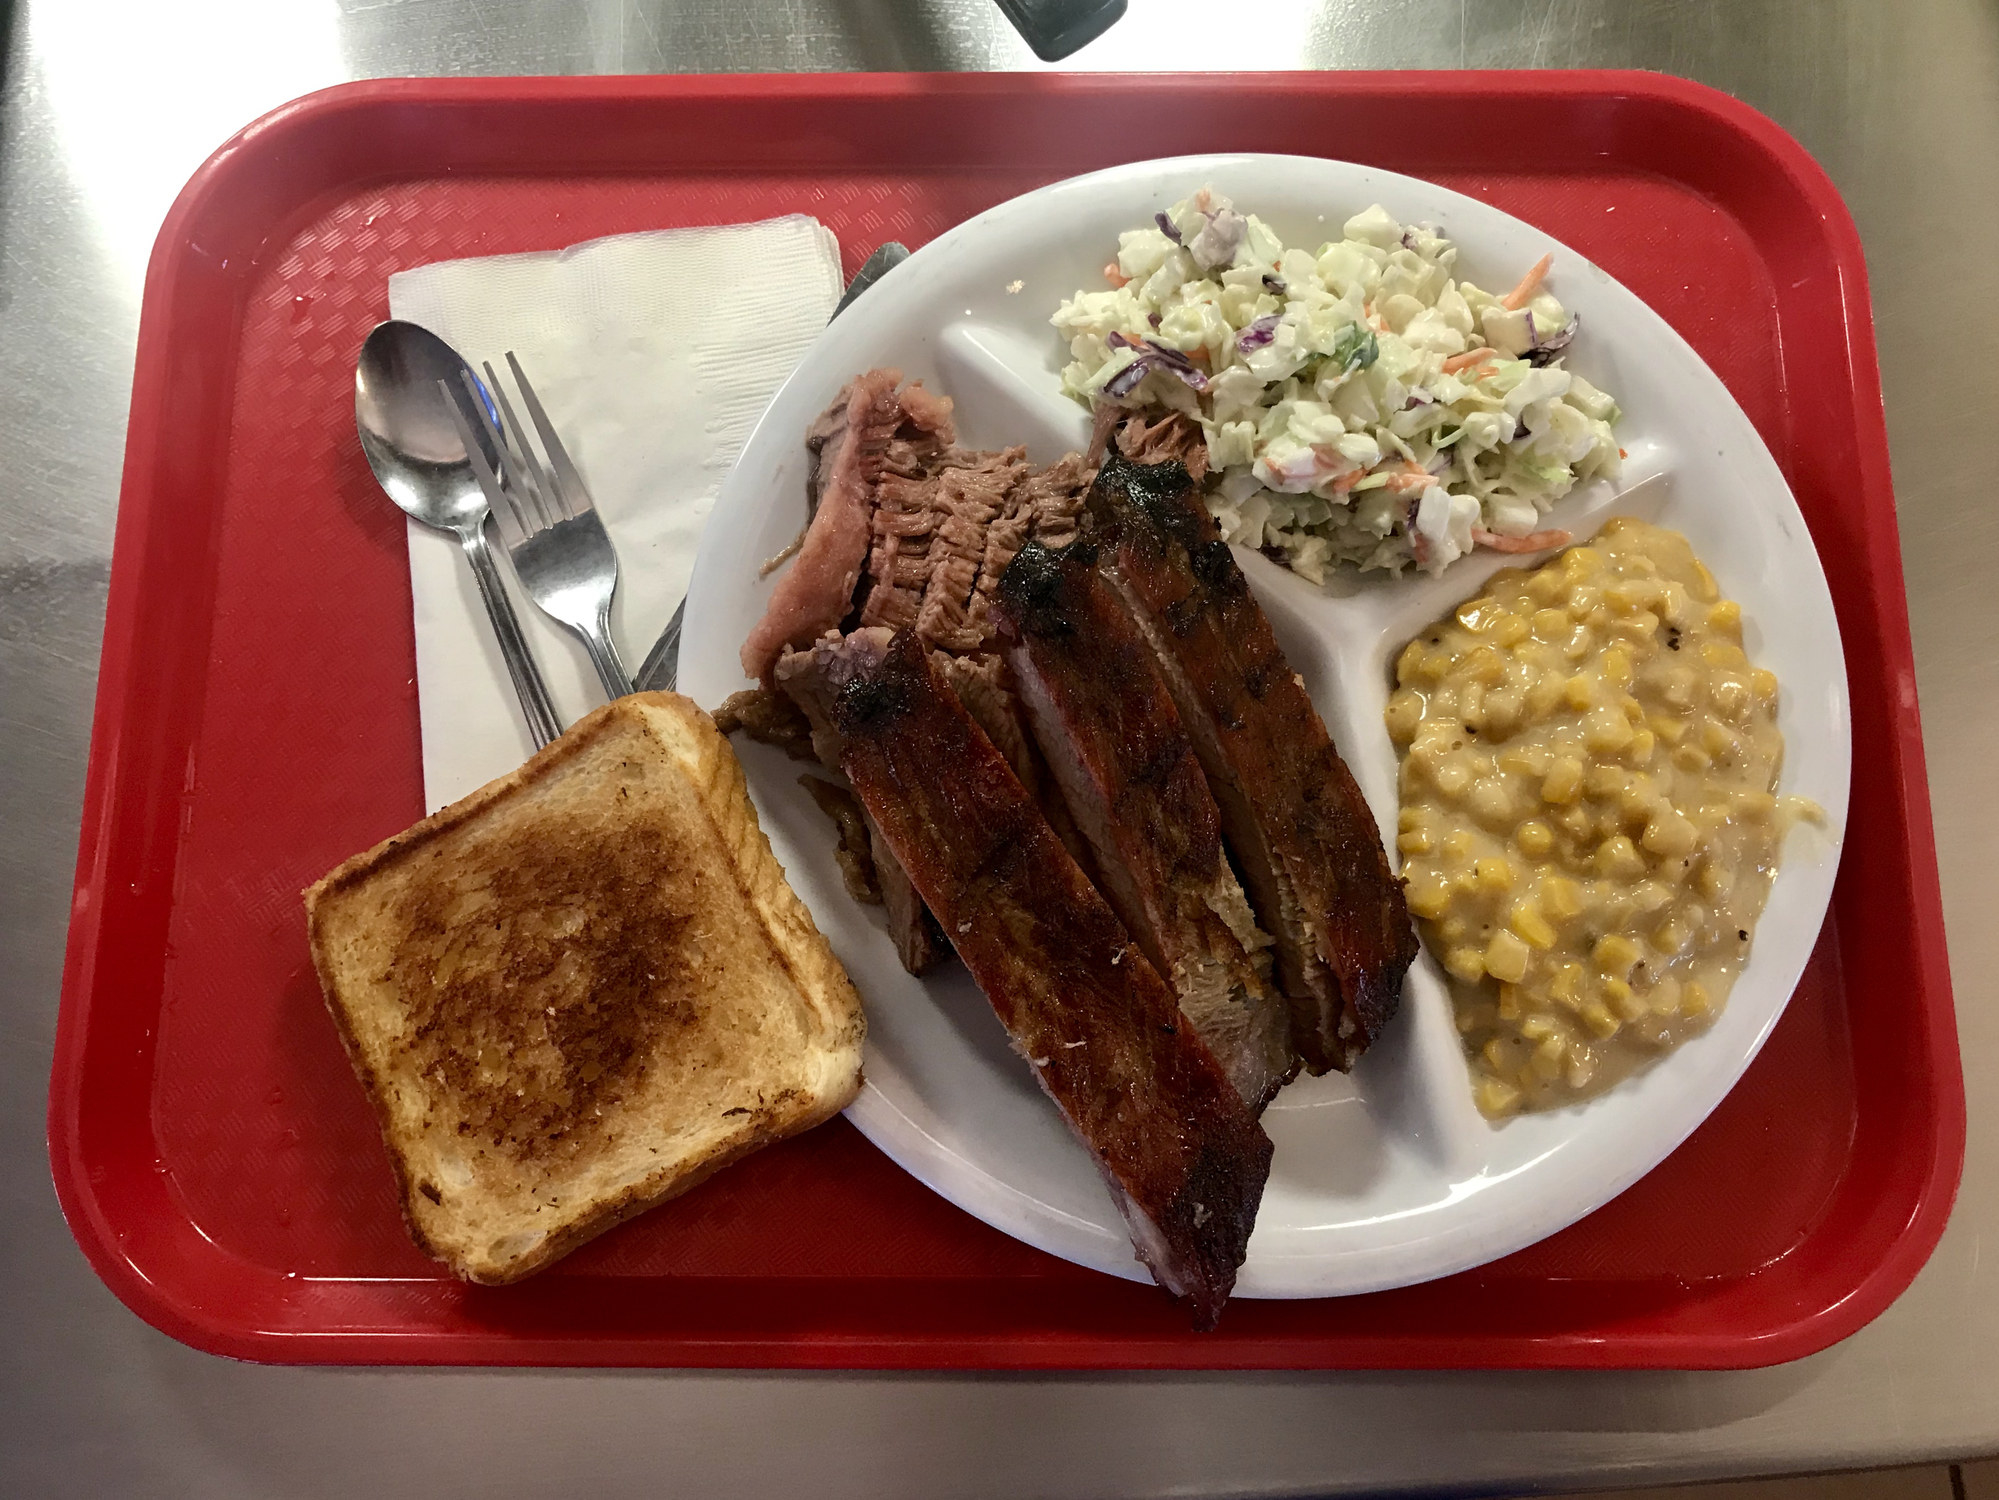 A plate of BBQ with brisket and sides.